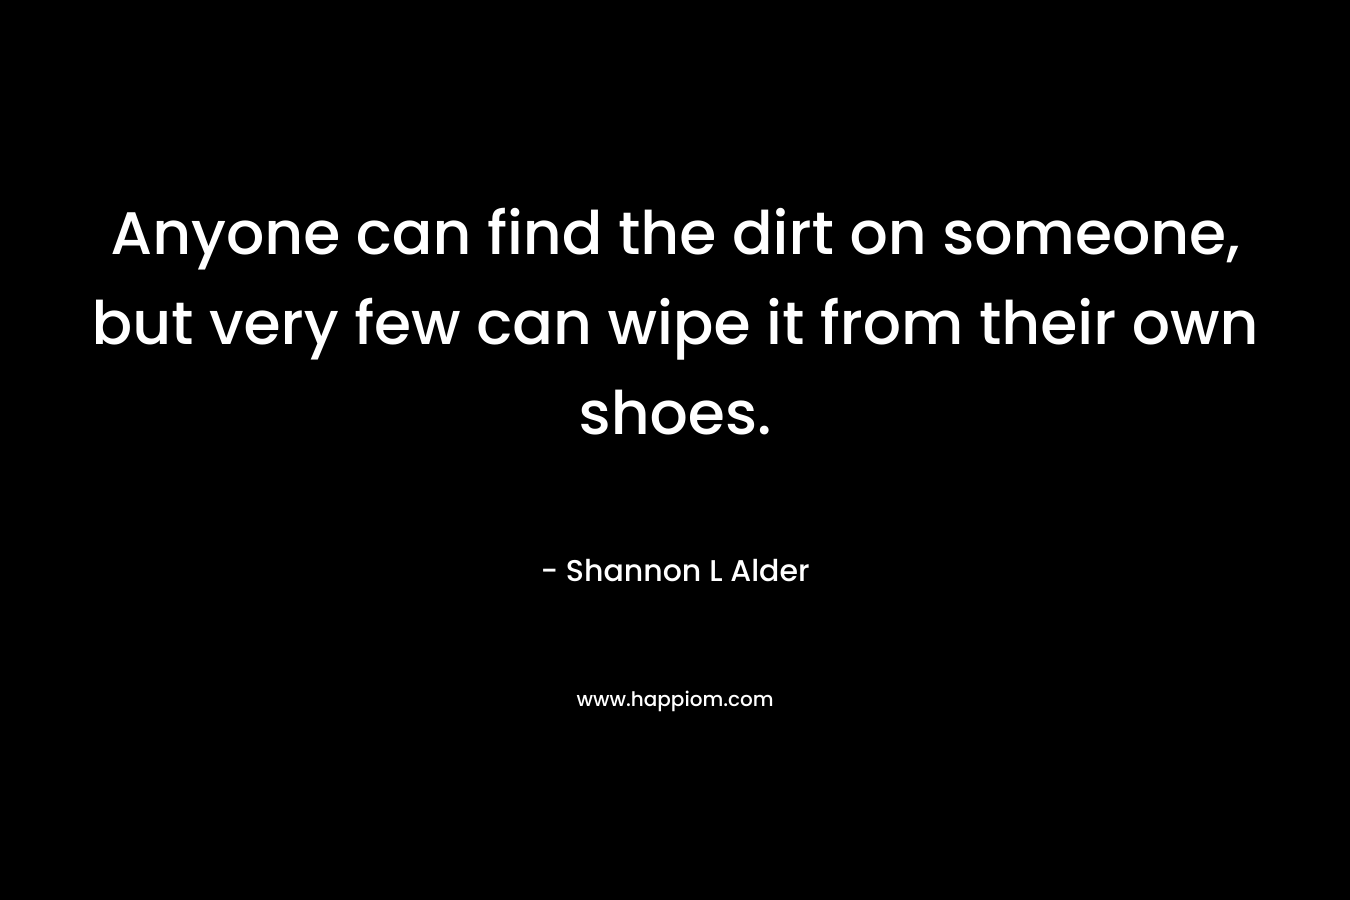 Anyone can find the dirt on someone, but very few can wipe it from their own shoes. – Shannon L Alder